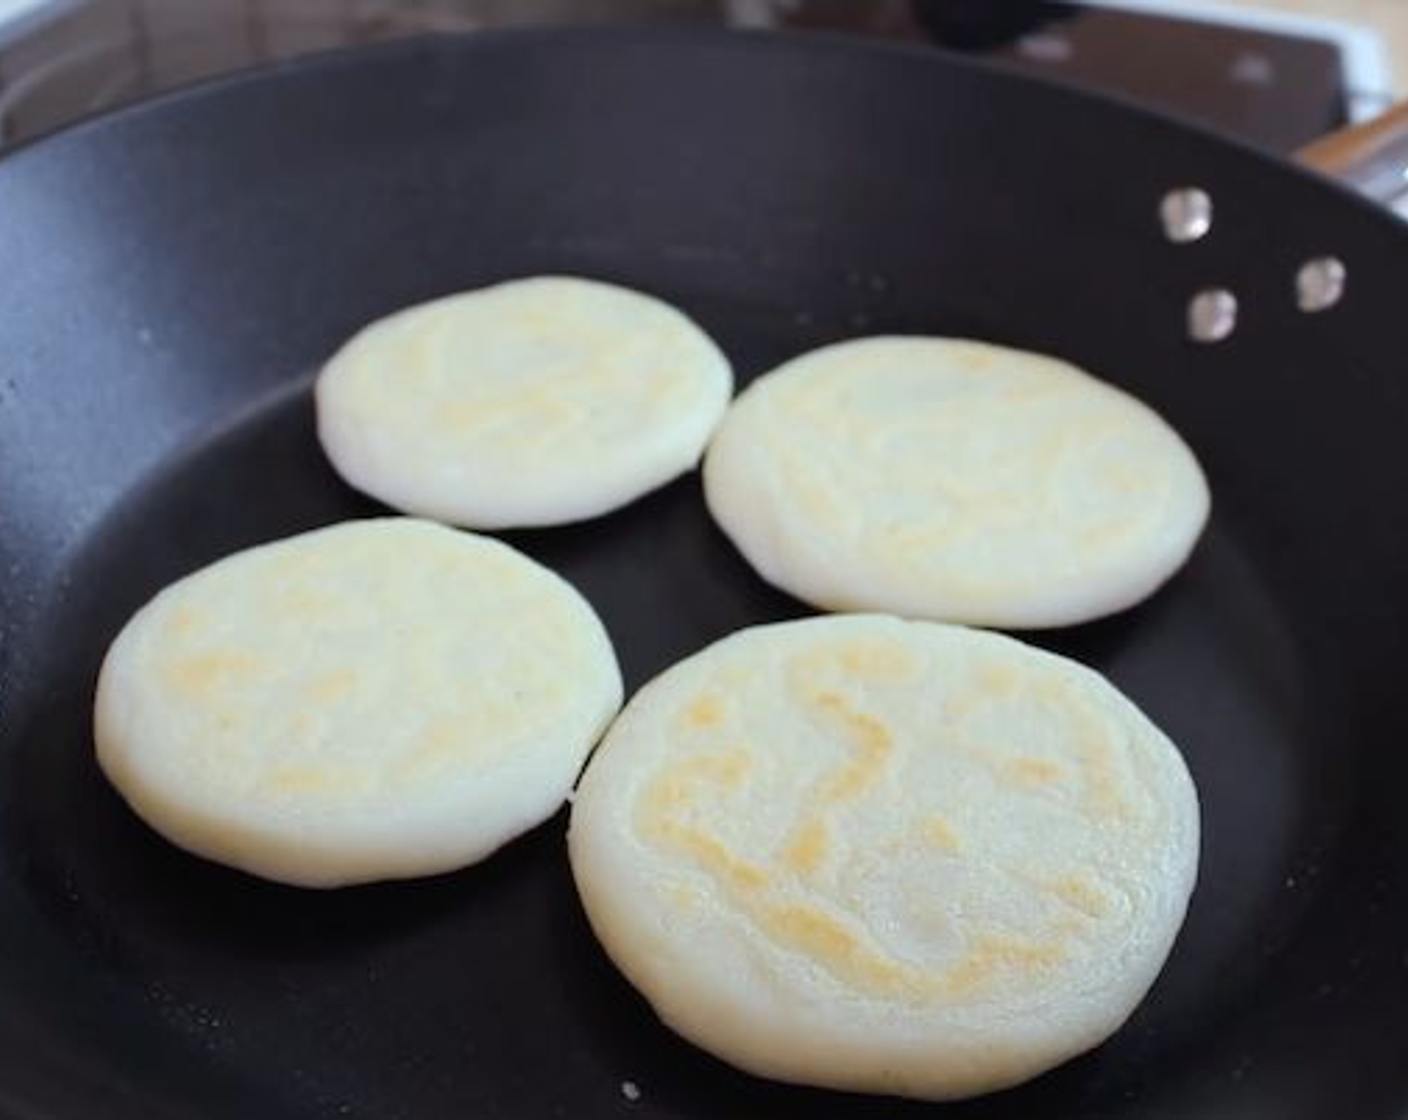 step 5 Flip and cook for another 10 minutes. Make sure the bottom is fully cooked before flipping to avoid sticking and breaking the arepa apart when flipping.